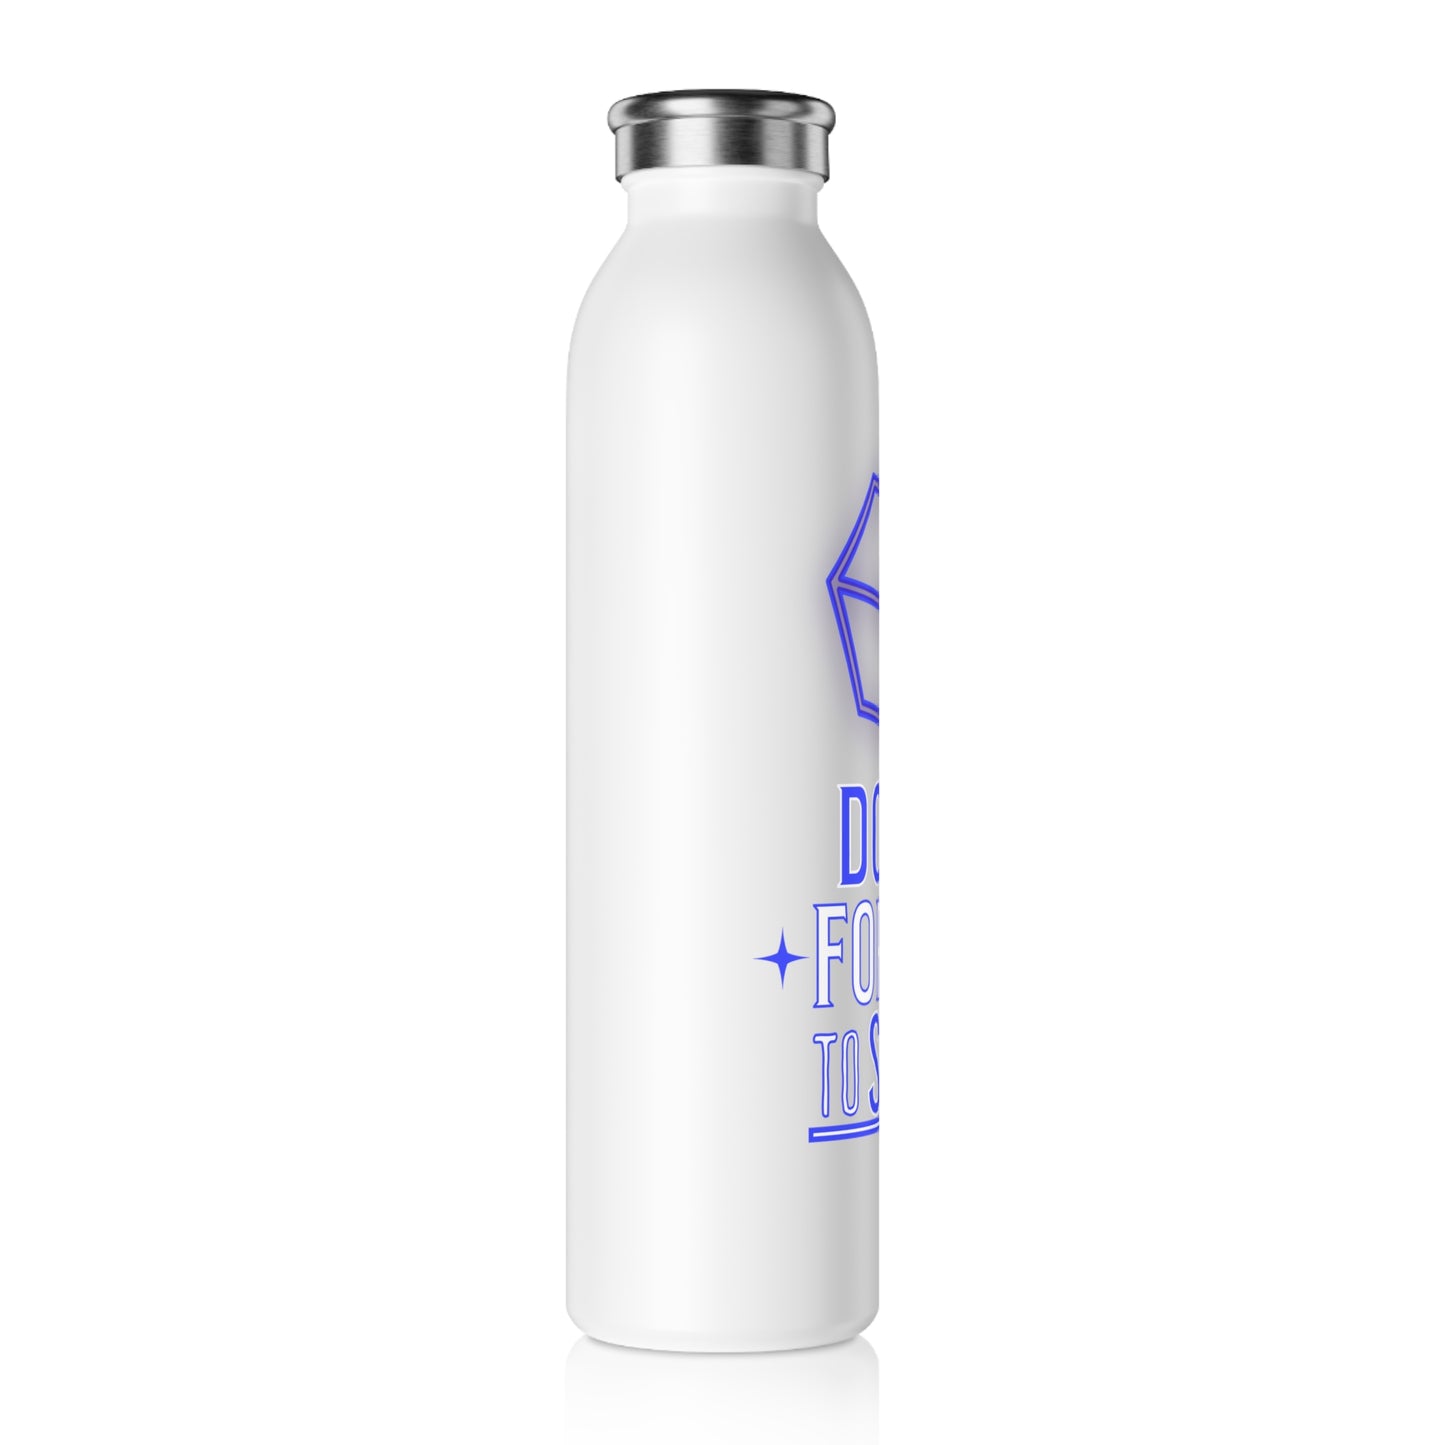 "don't forget to snap" Marvel Snap Slim Water Bottle